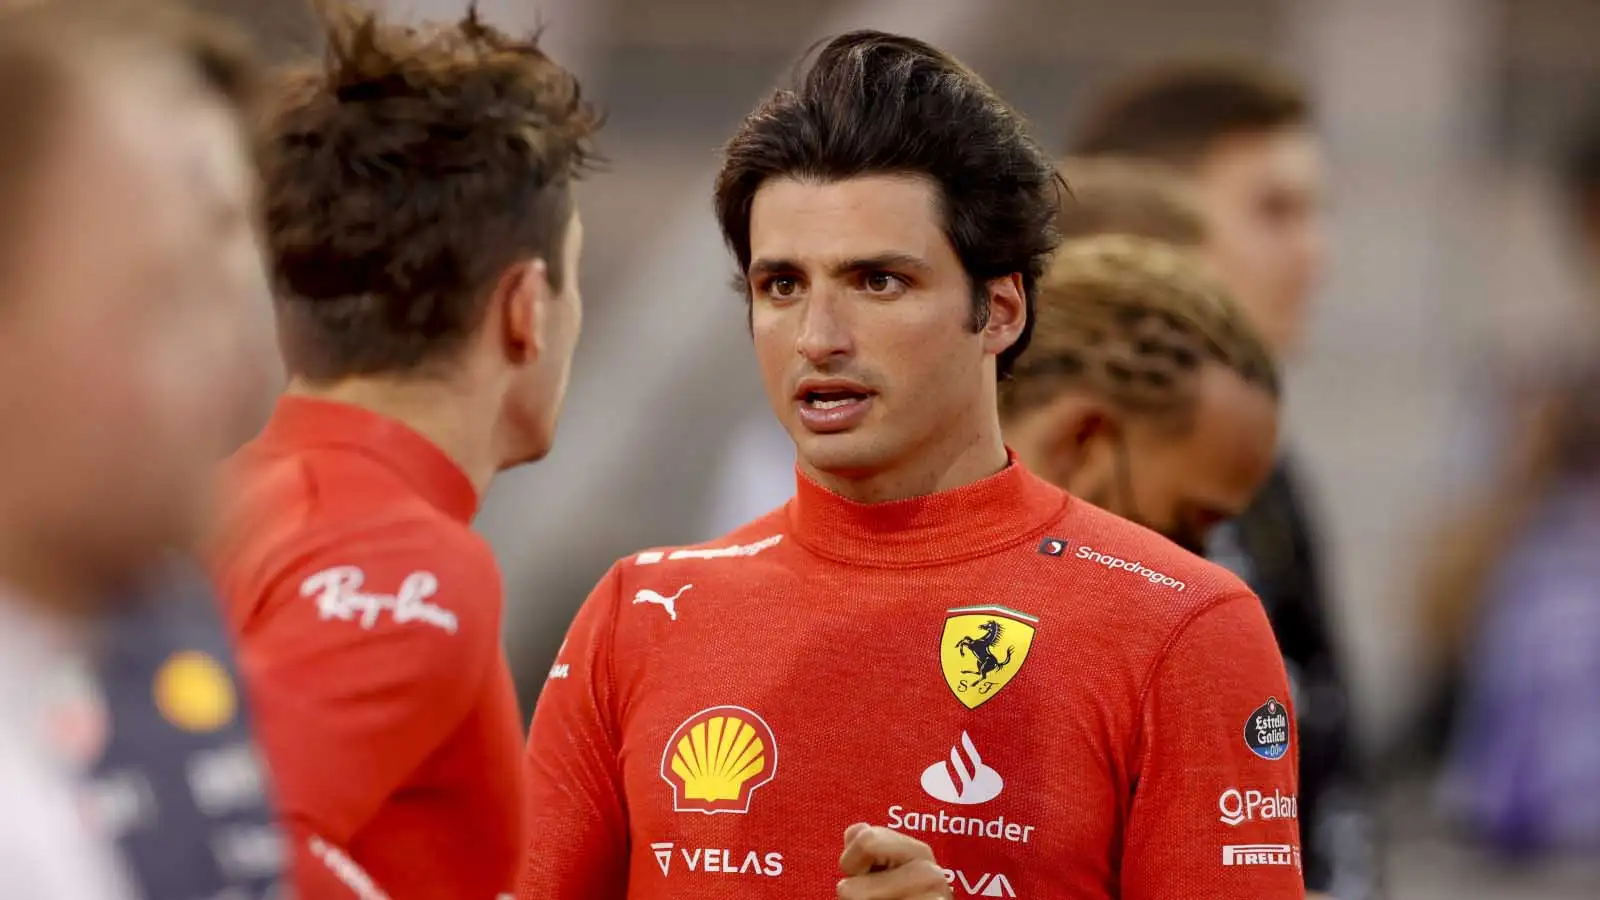 Carlos Sainz chats to Charles Leclerc on the grid. Bahrain March 2022.